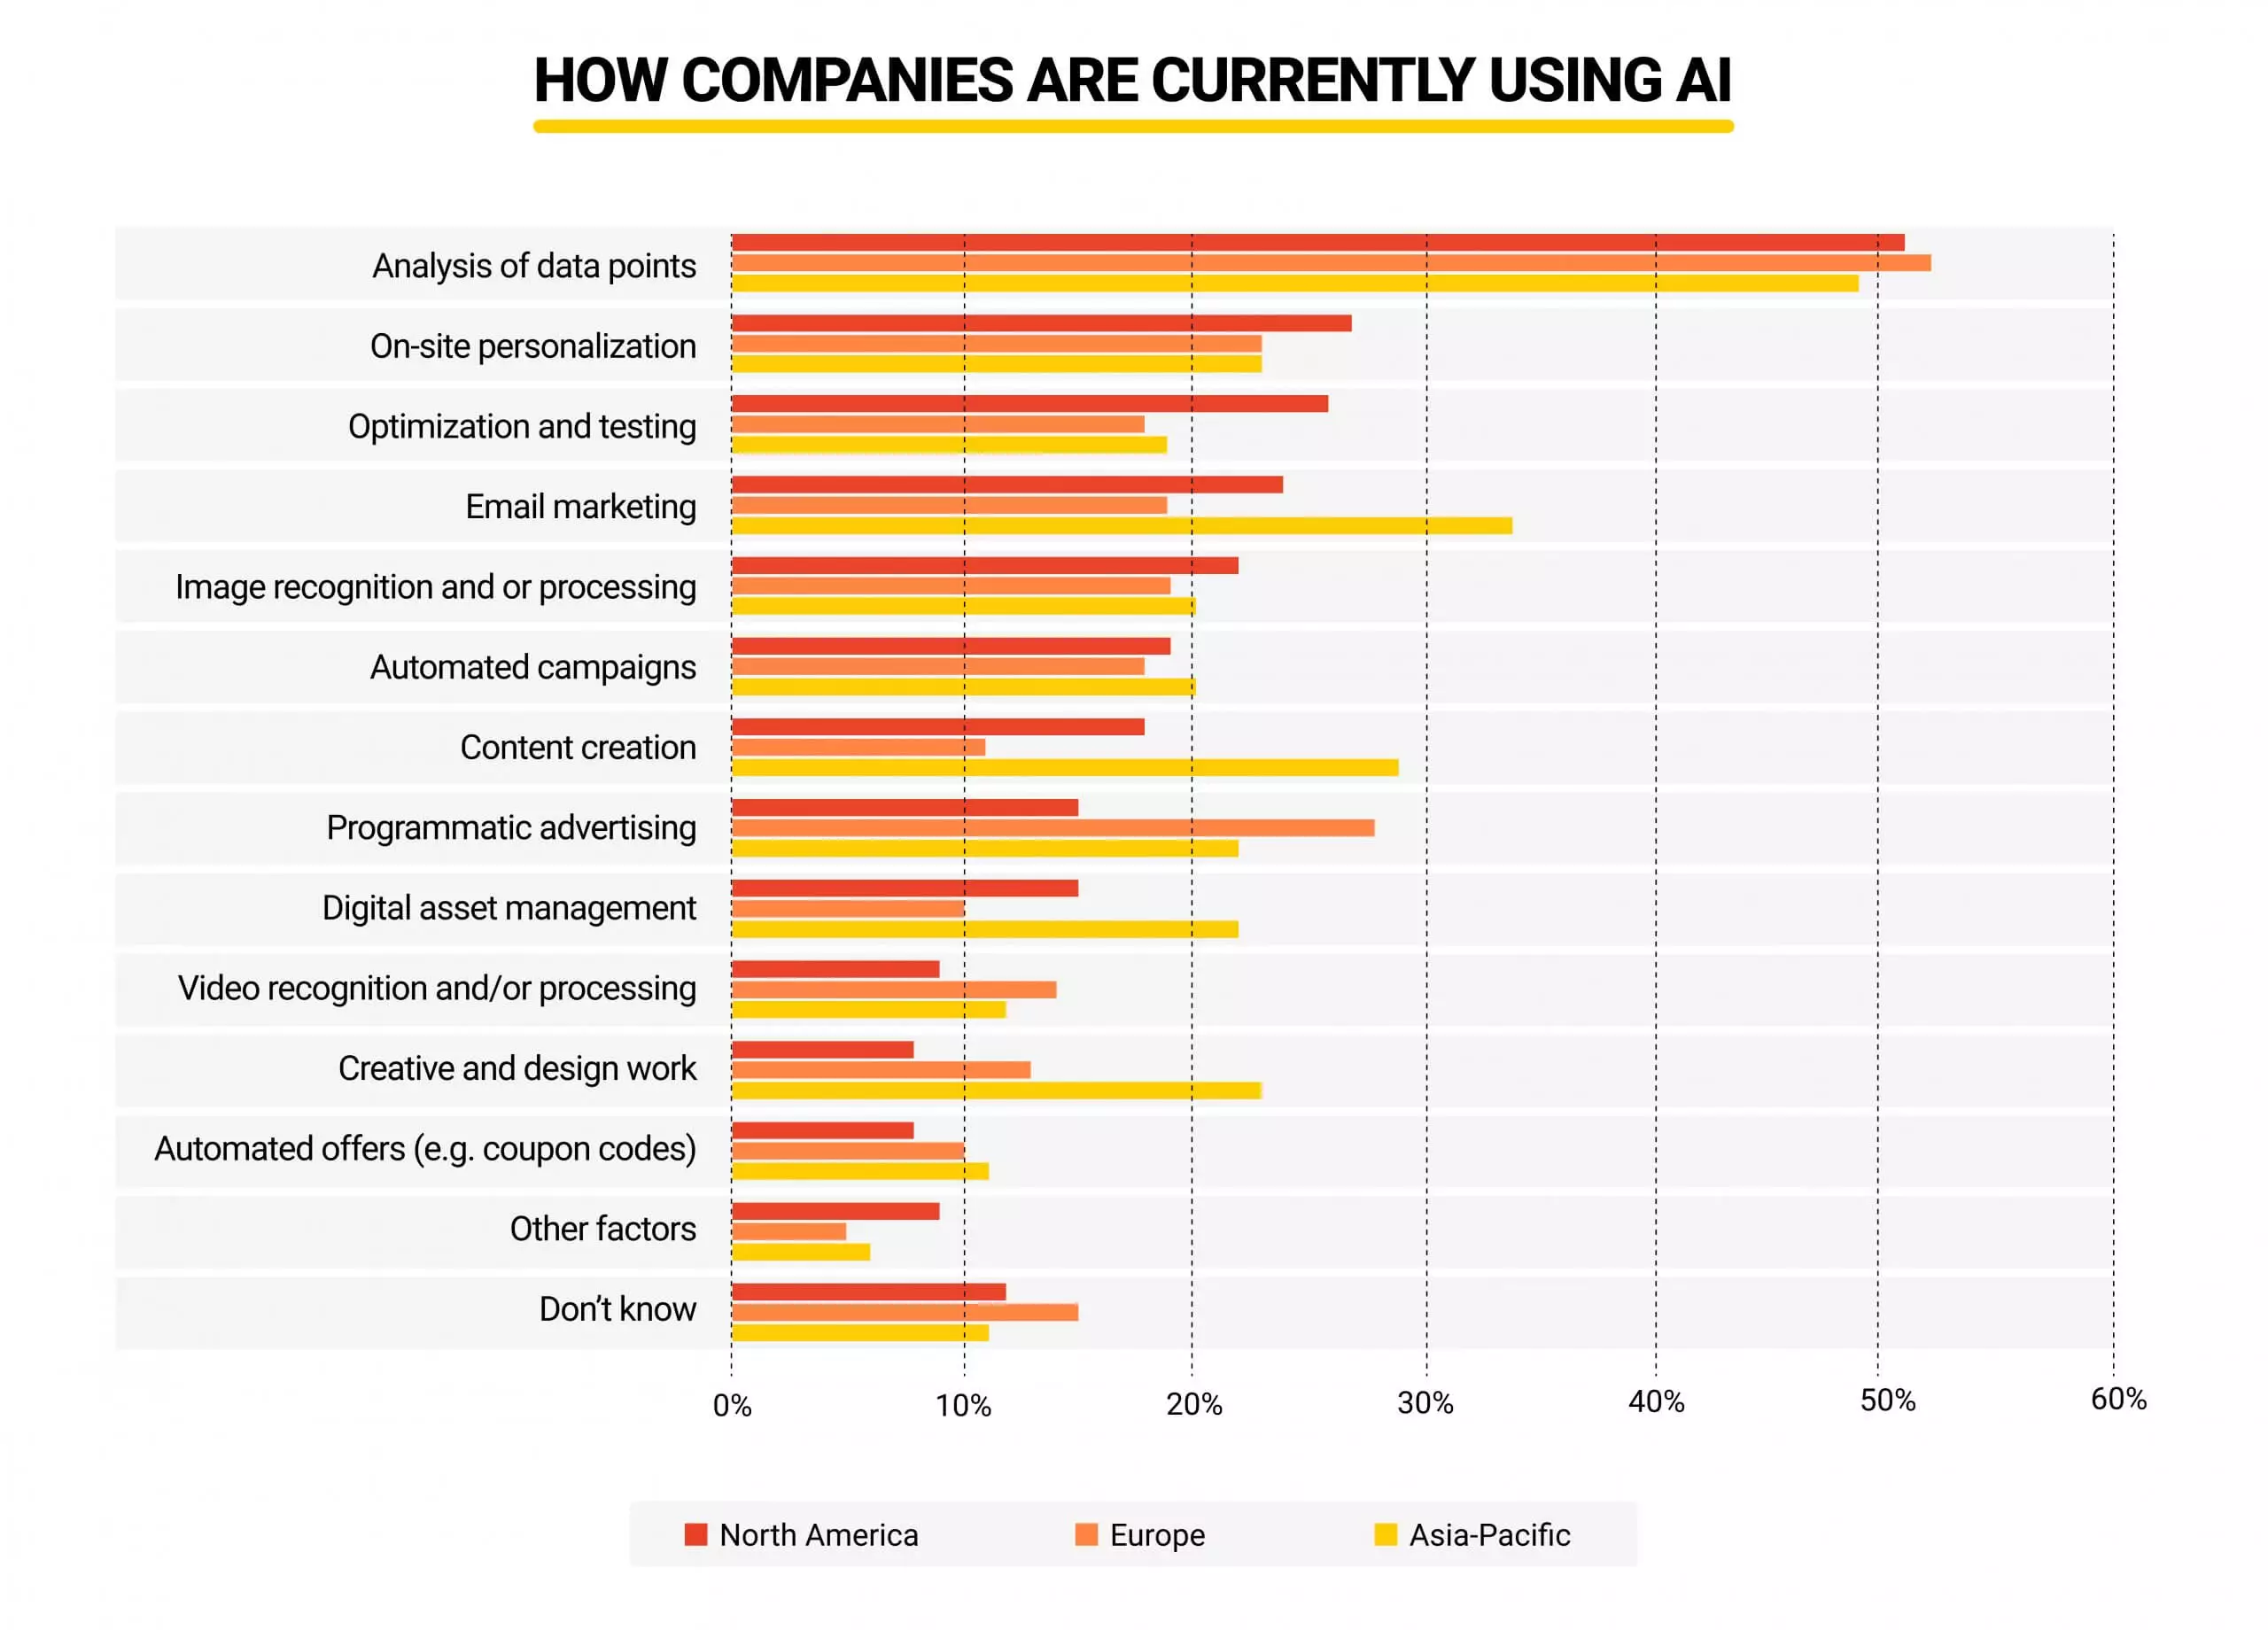 Chart bar showing how companies are currently using AI by AIbees